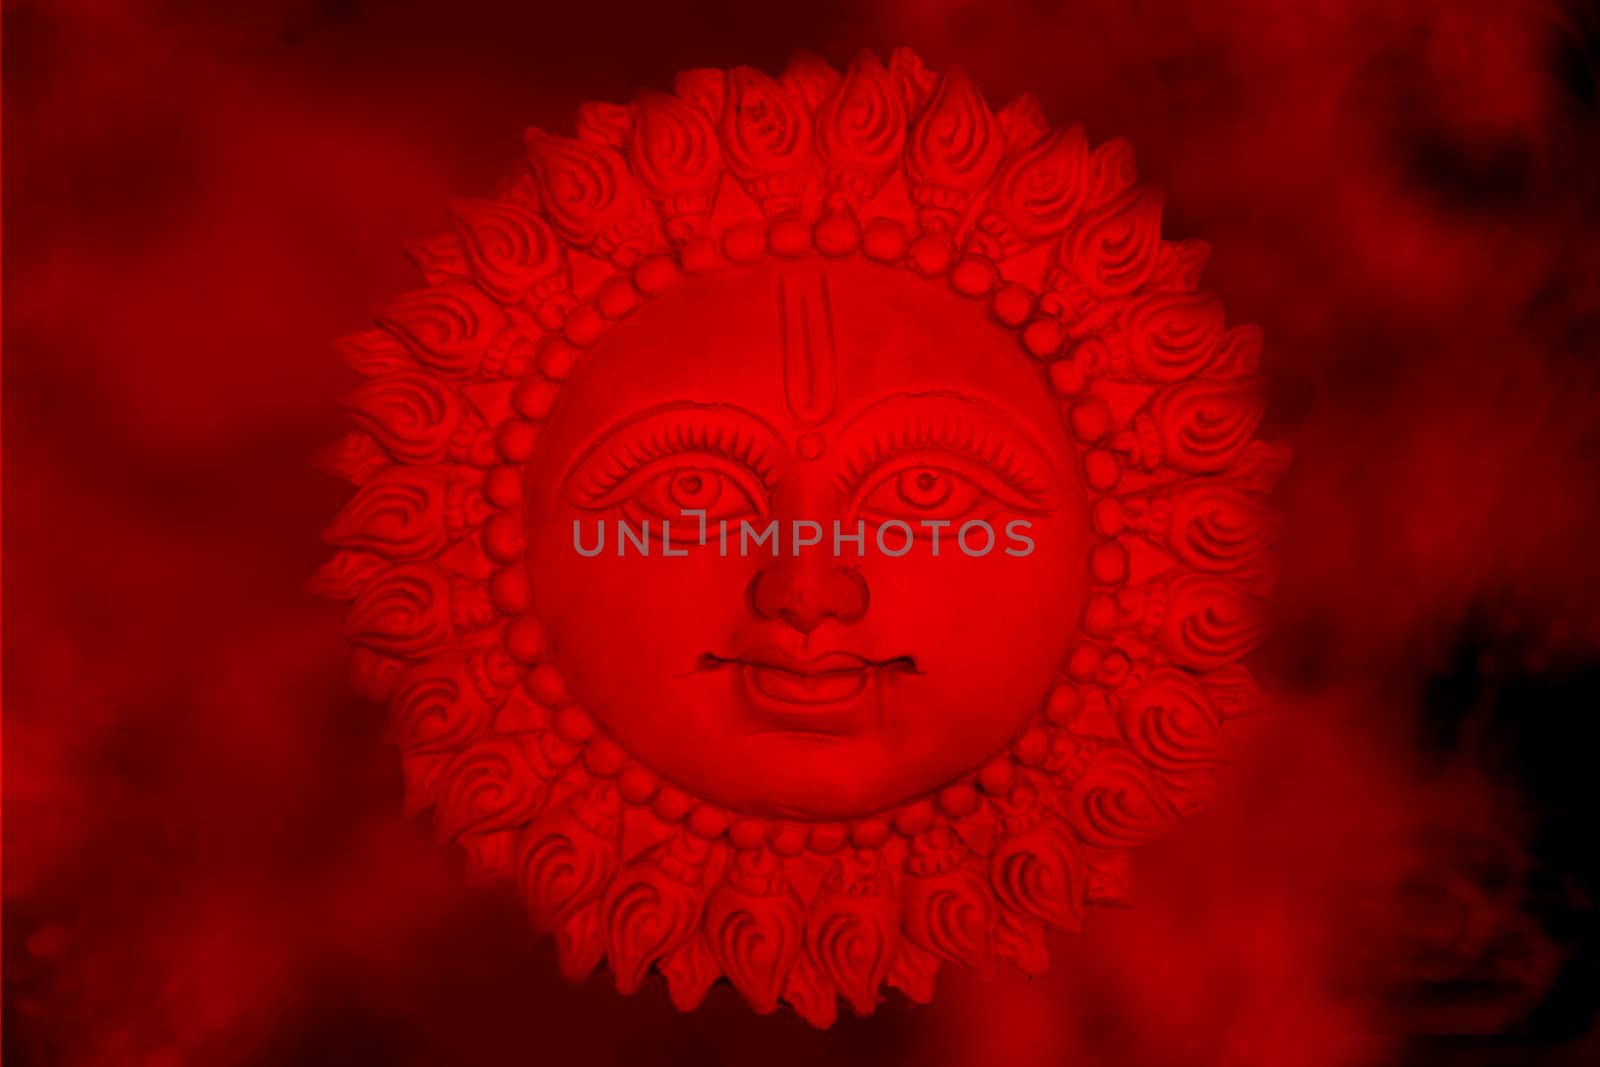 An abstract background of the Sun God according to Hinduism, in hot red clouds.